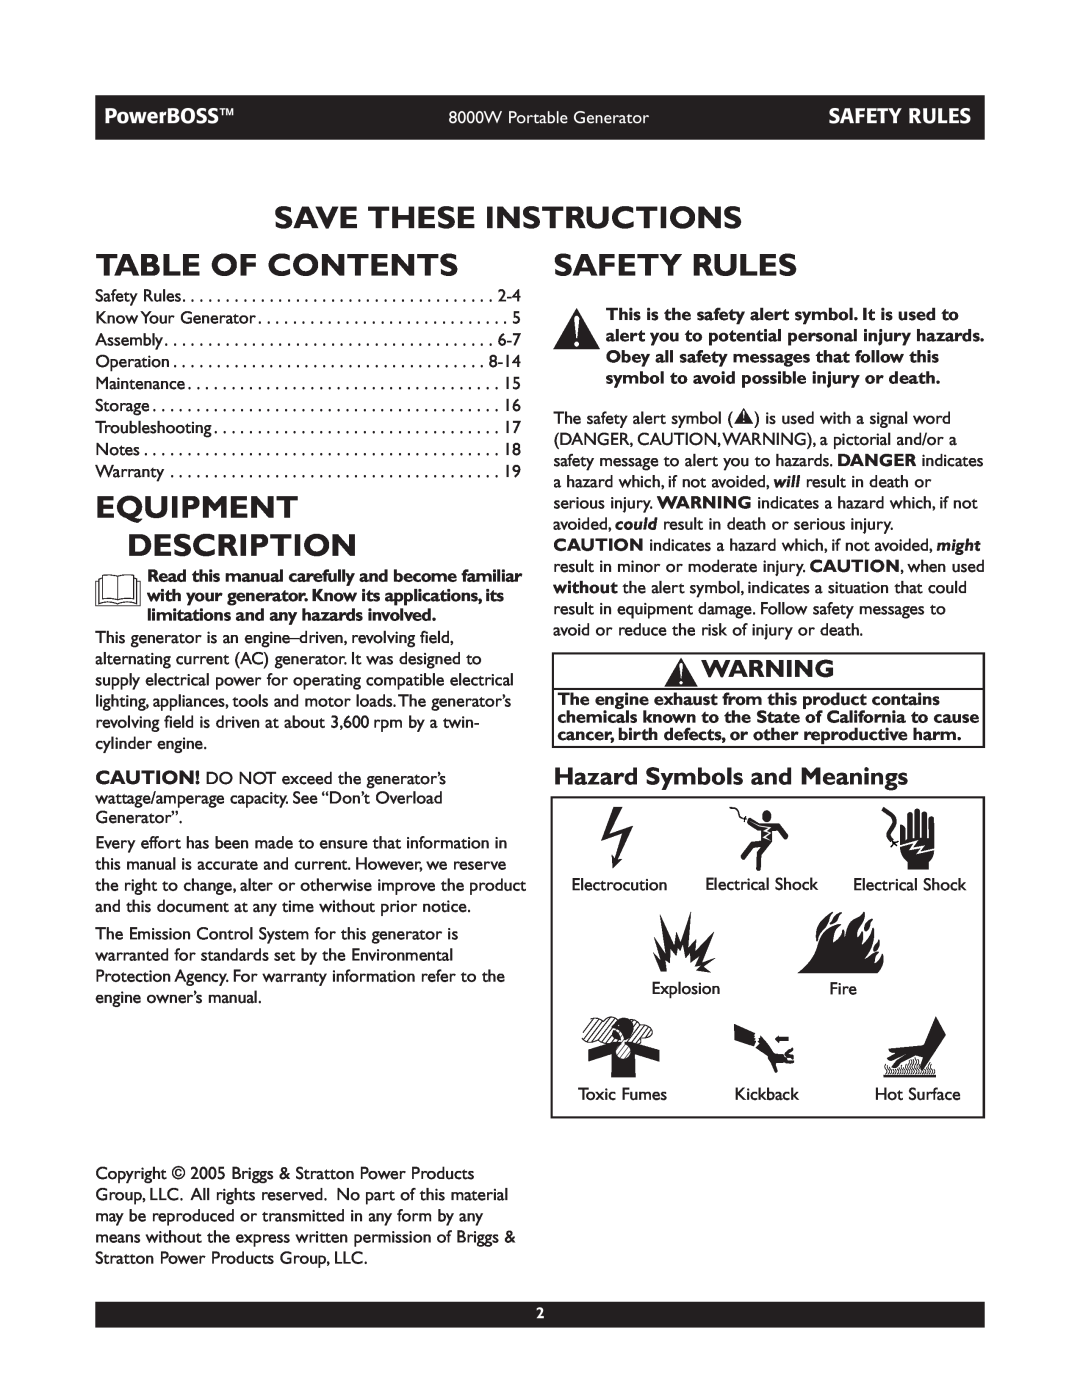 Briggs & Stratton 30228 Save These Instructions, Table Of Contents, Equipment Description, Safety Rules, PowerBOSS 